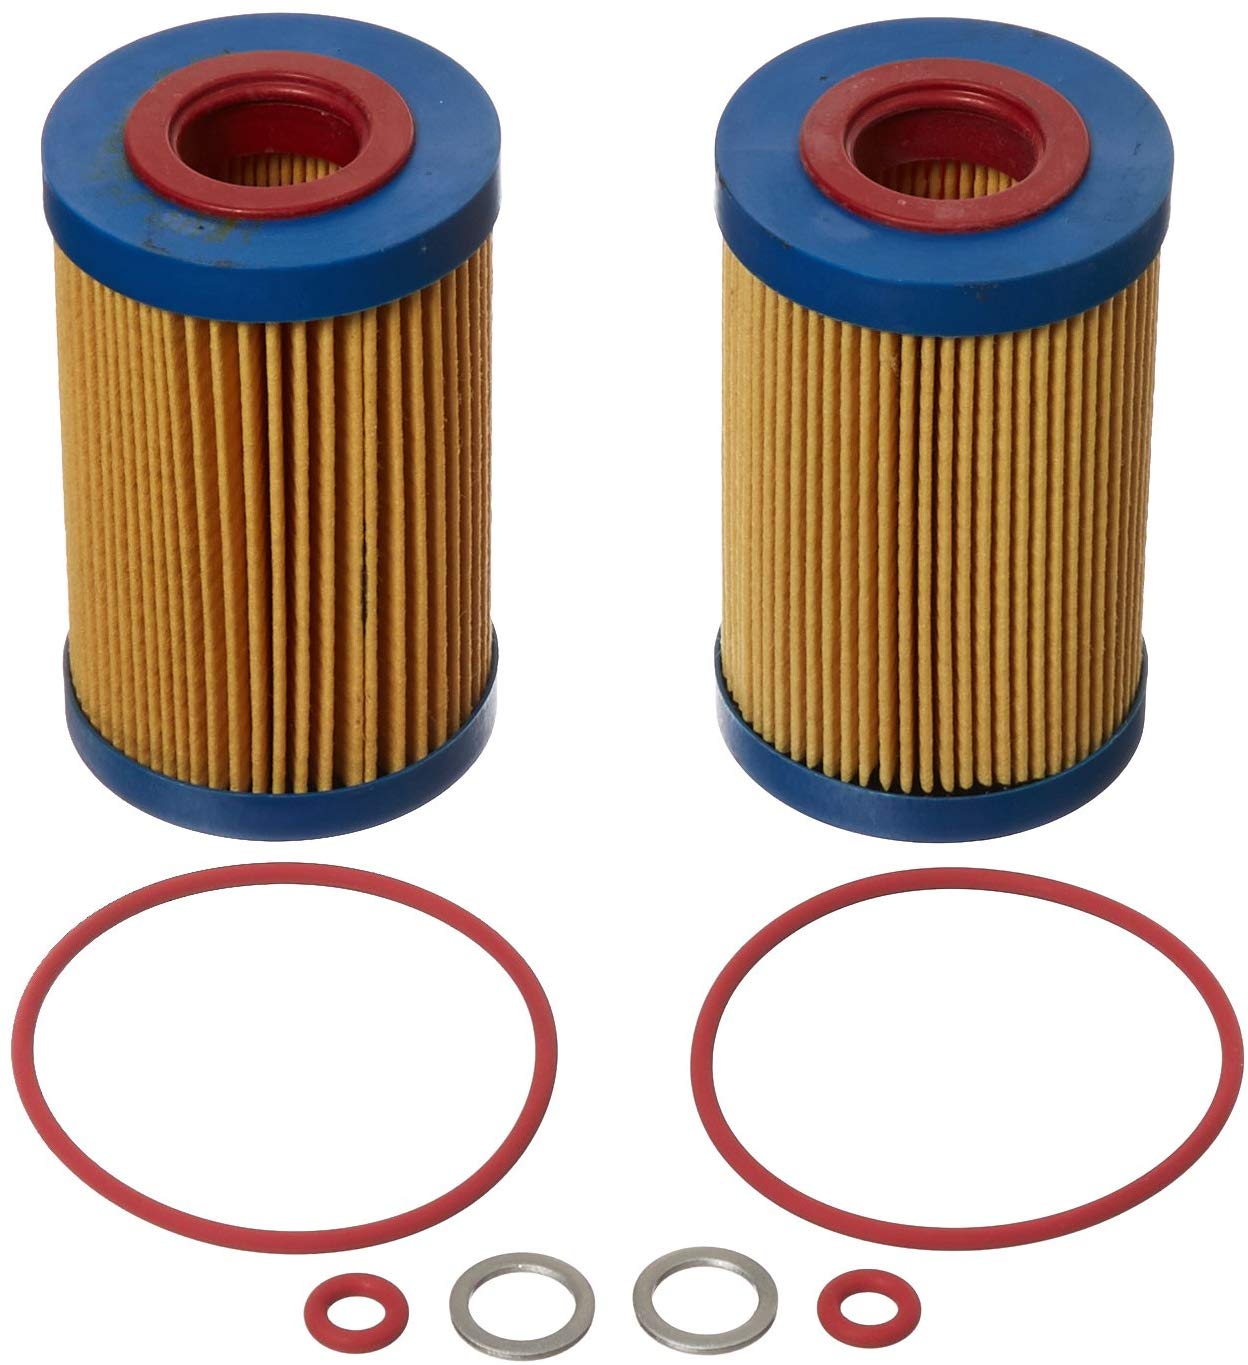 Mobil 1 M1C-255 Extended Performance Oil Filter (Pack of 2)